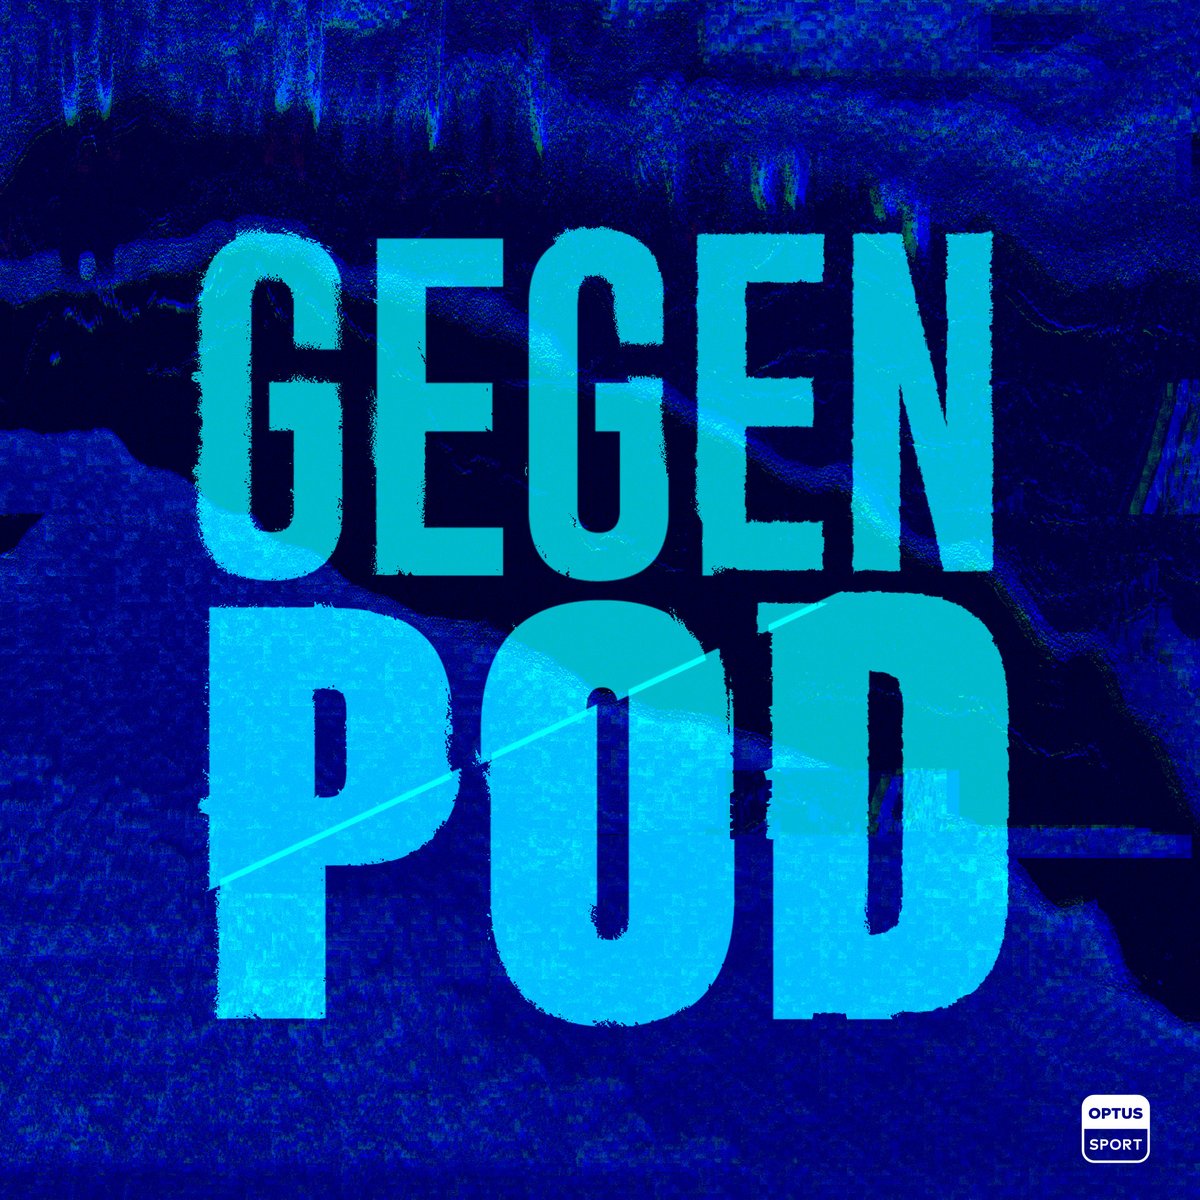 New #GegenPod dropped! 🔊 🍀 Celtic closing in on a domestic treble 🏴󠁧󠁢󠁳󠁣󠁴󠁿 Celtic and Rangers to join the PL or a Super League? 🤝 Leeds look like sacking Javi Gracia for...Sam Allardyce?! 🎙️ @TSorensen1, @jhnmcgnly, @teopellizzeri LISTEN | watchoptus.tv/GGPOD-May3 #OptusSport